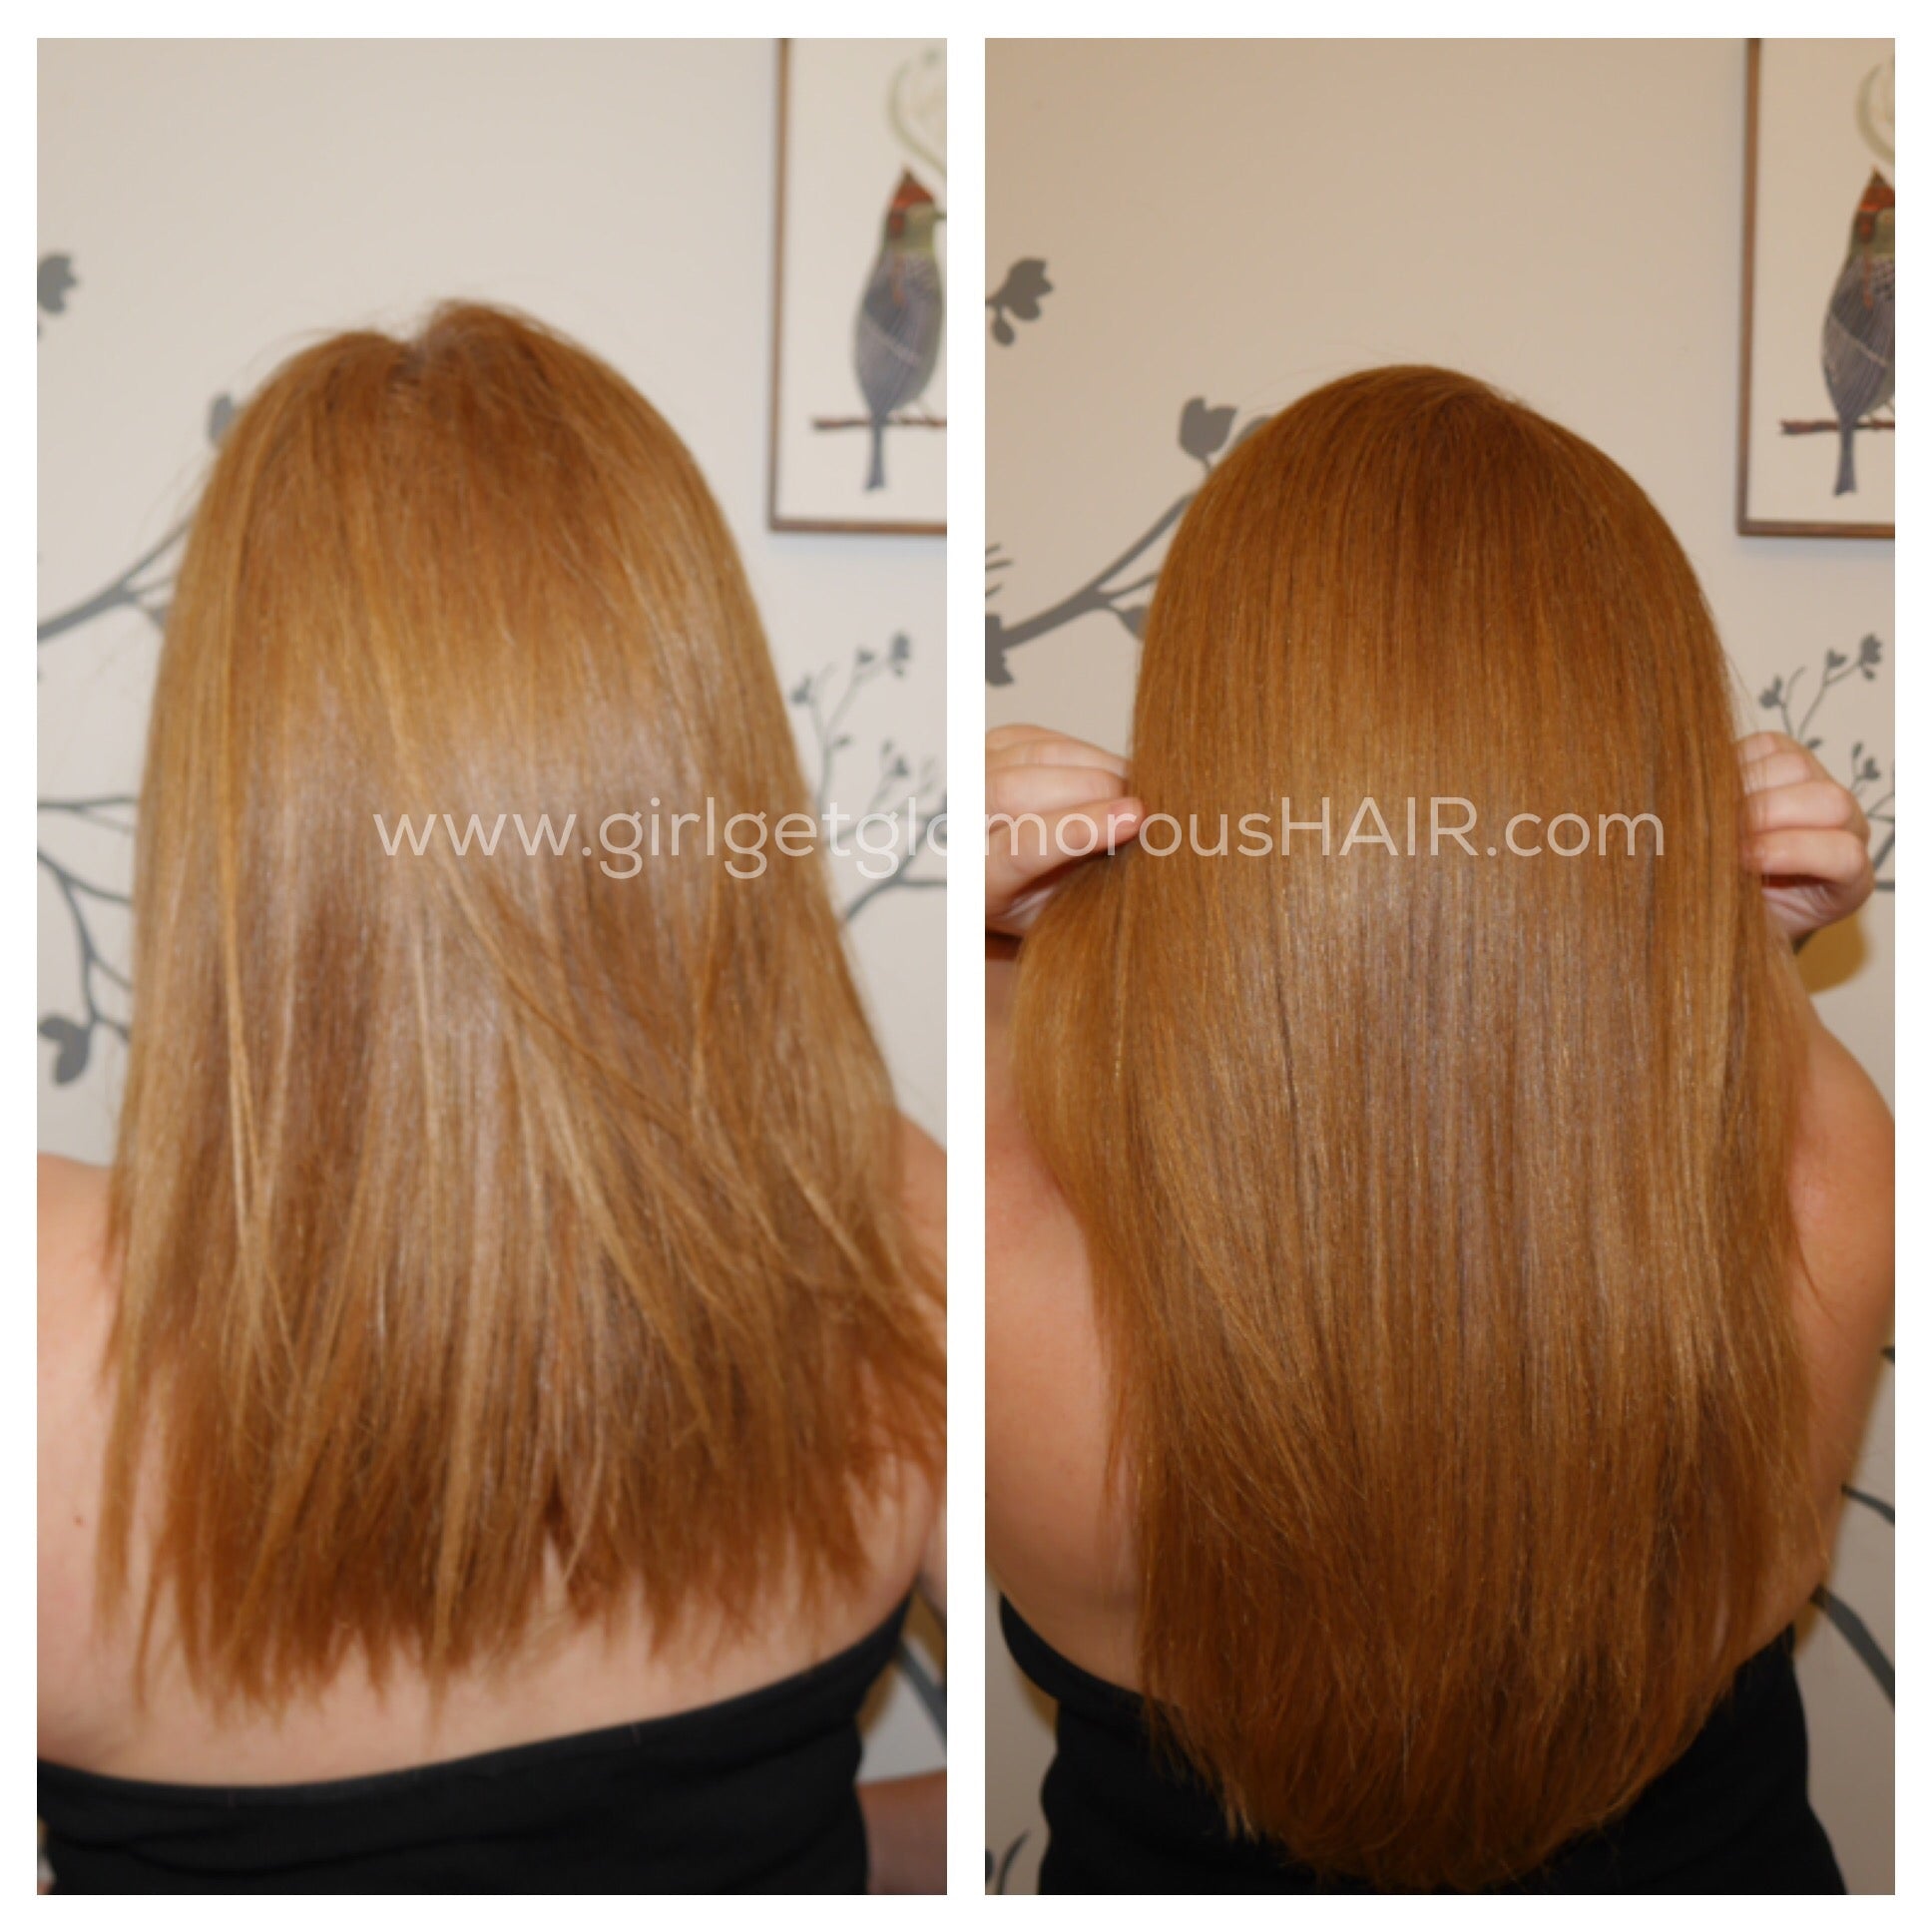 What Are Double Drawn Vs Single Drawn Hair Extensions